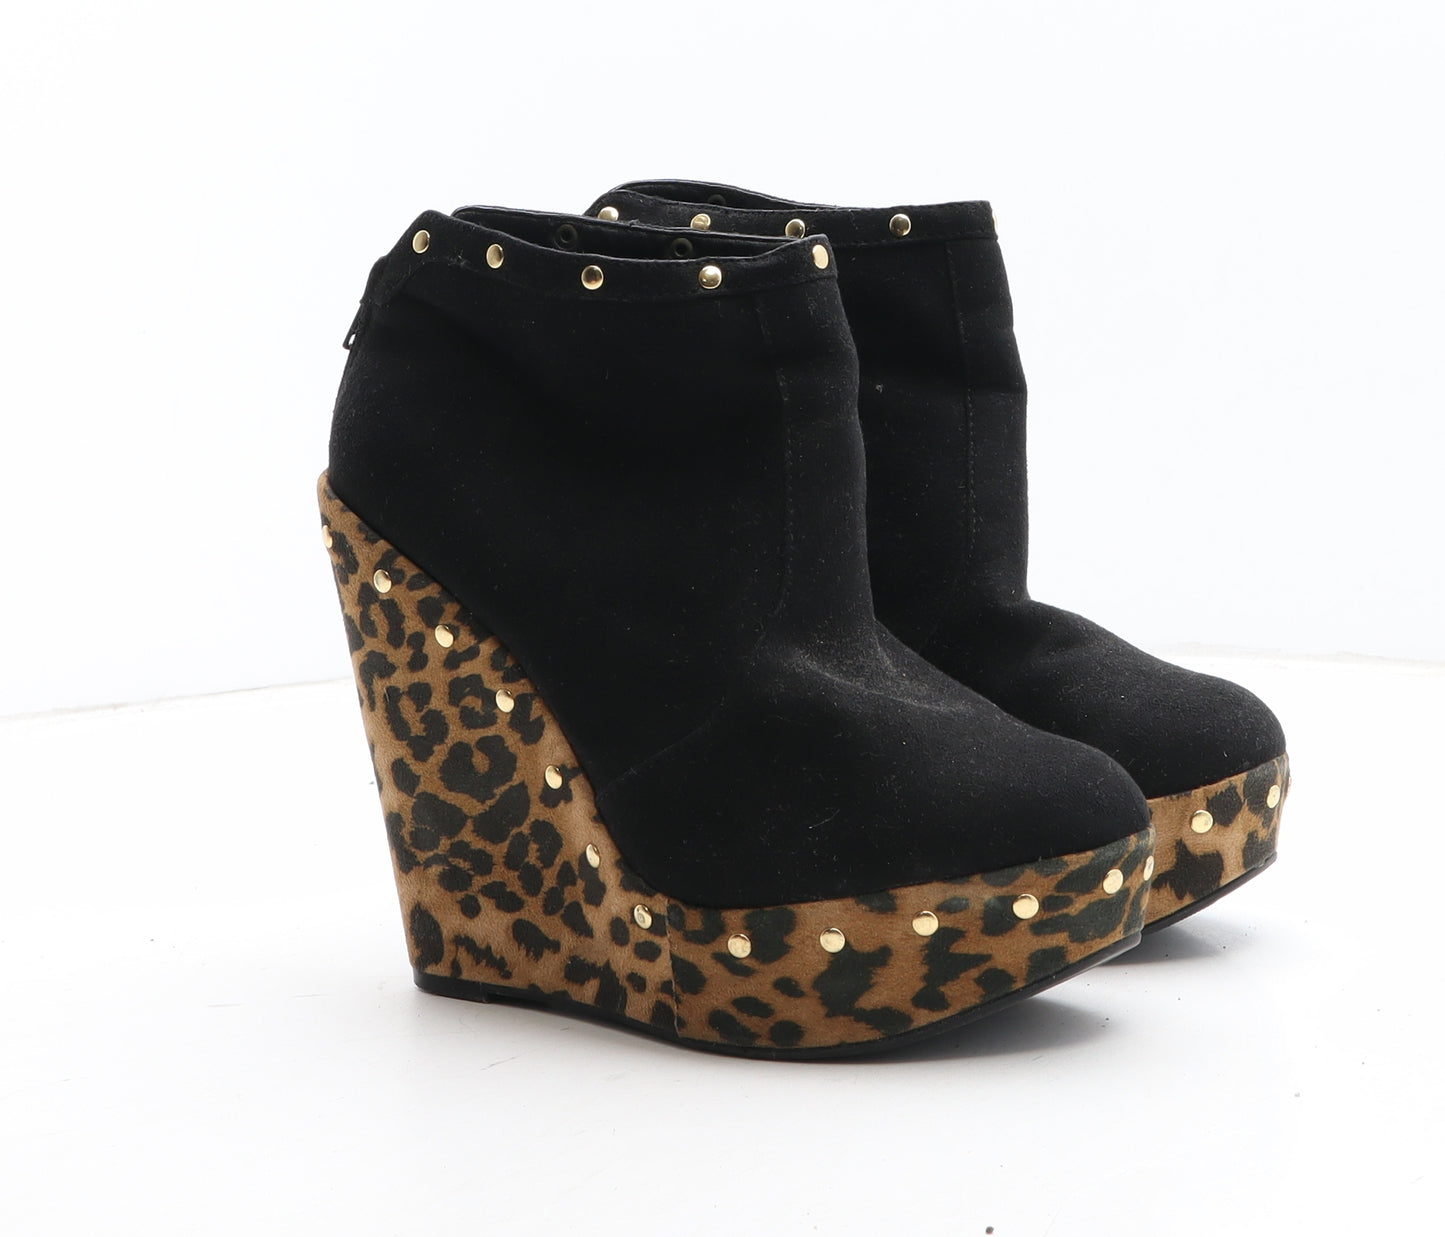 New Look Womens Black Animal Print Synthetic Bootie Boot UK - Leopard Pattern